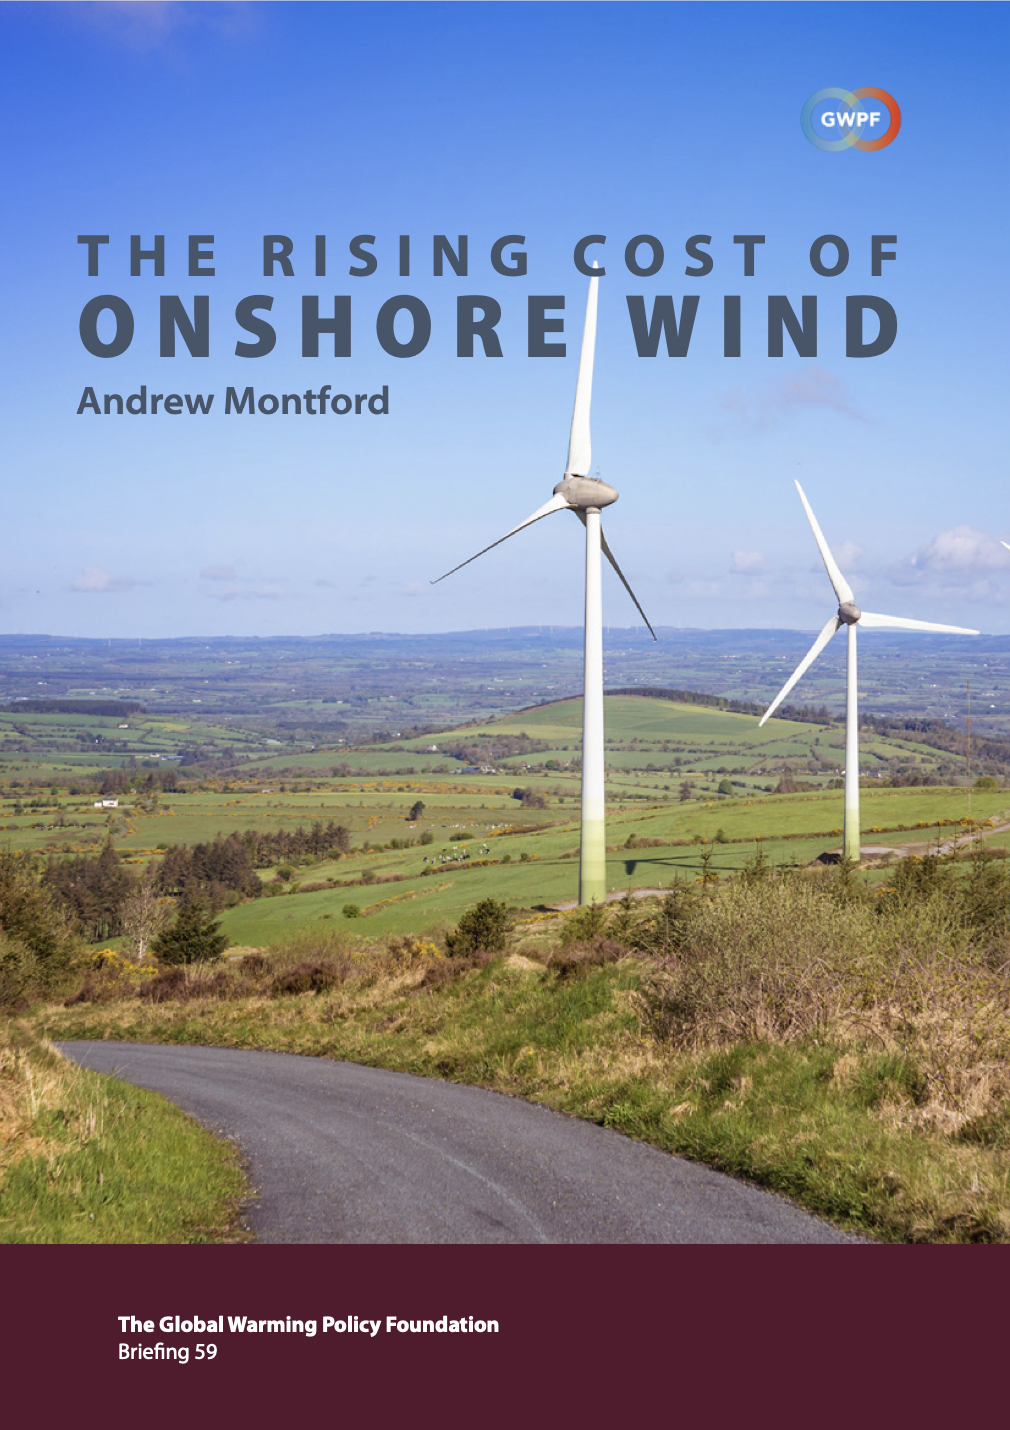 Cost of onshore wind report